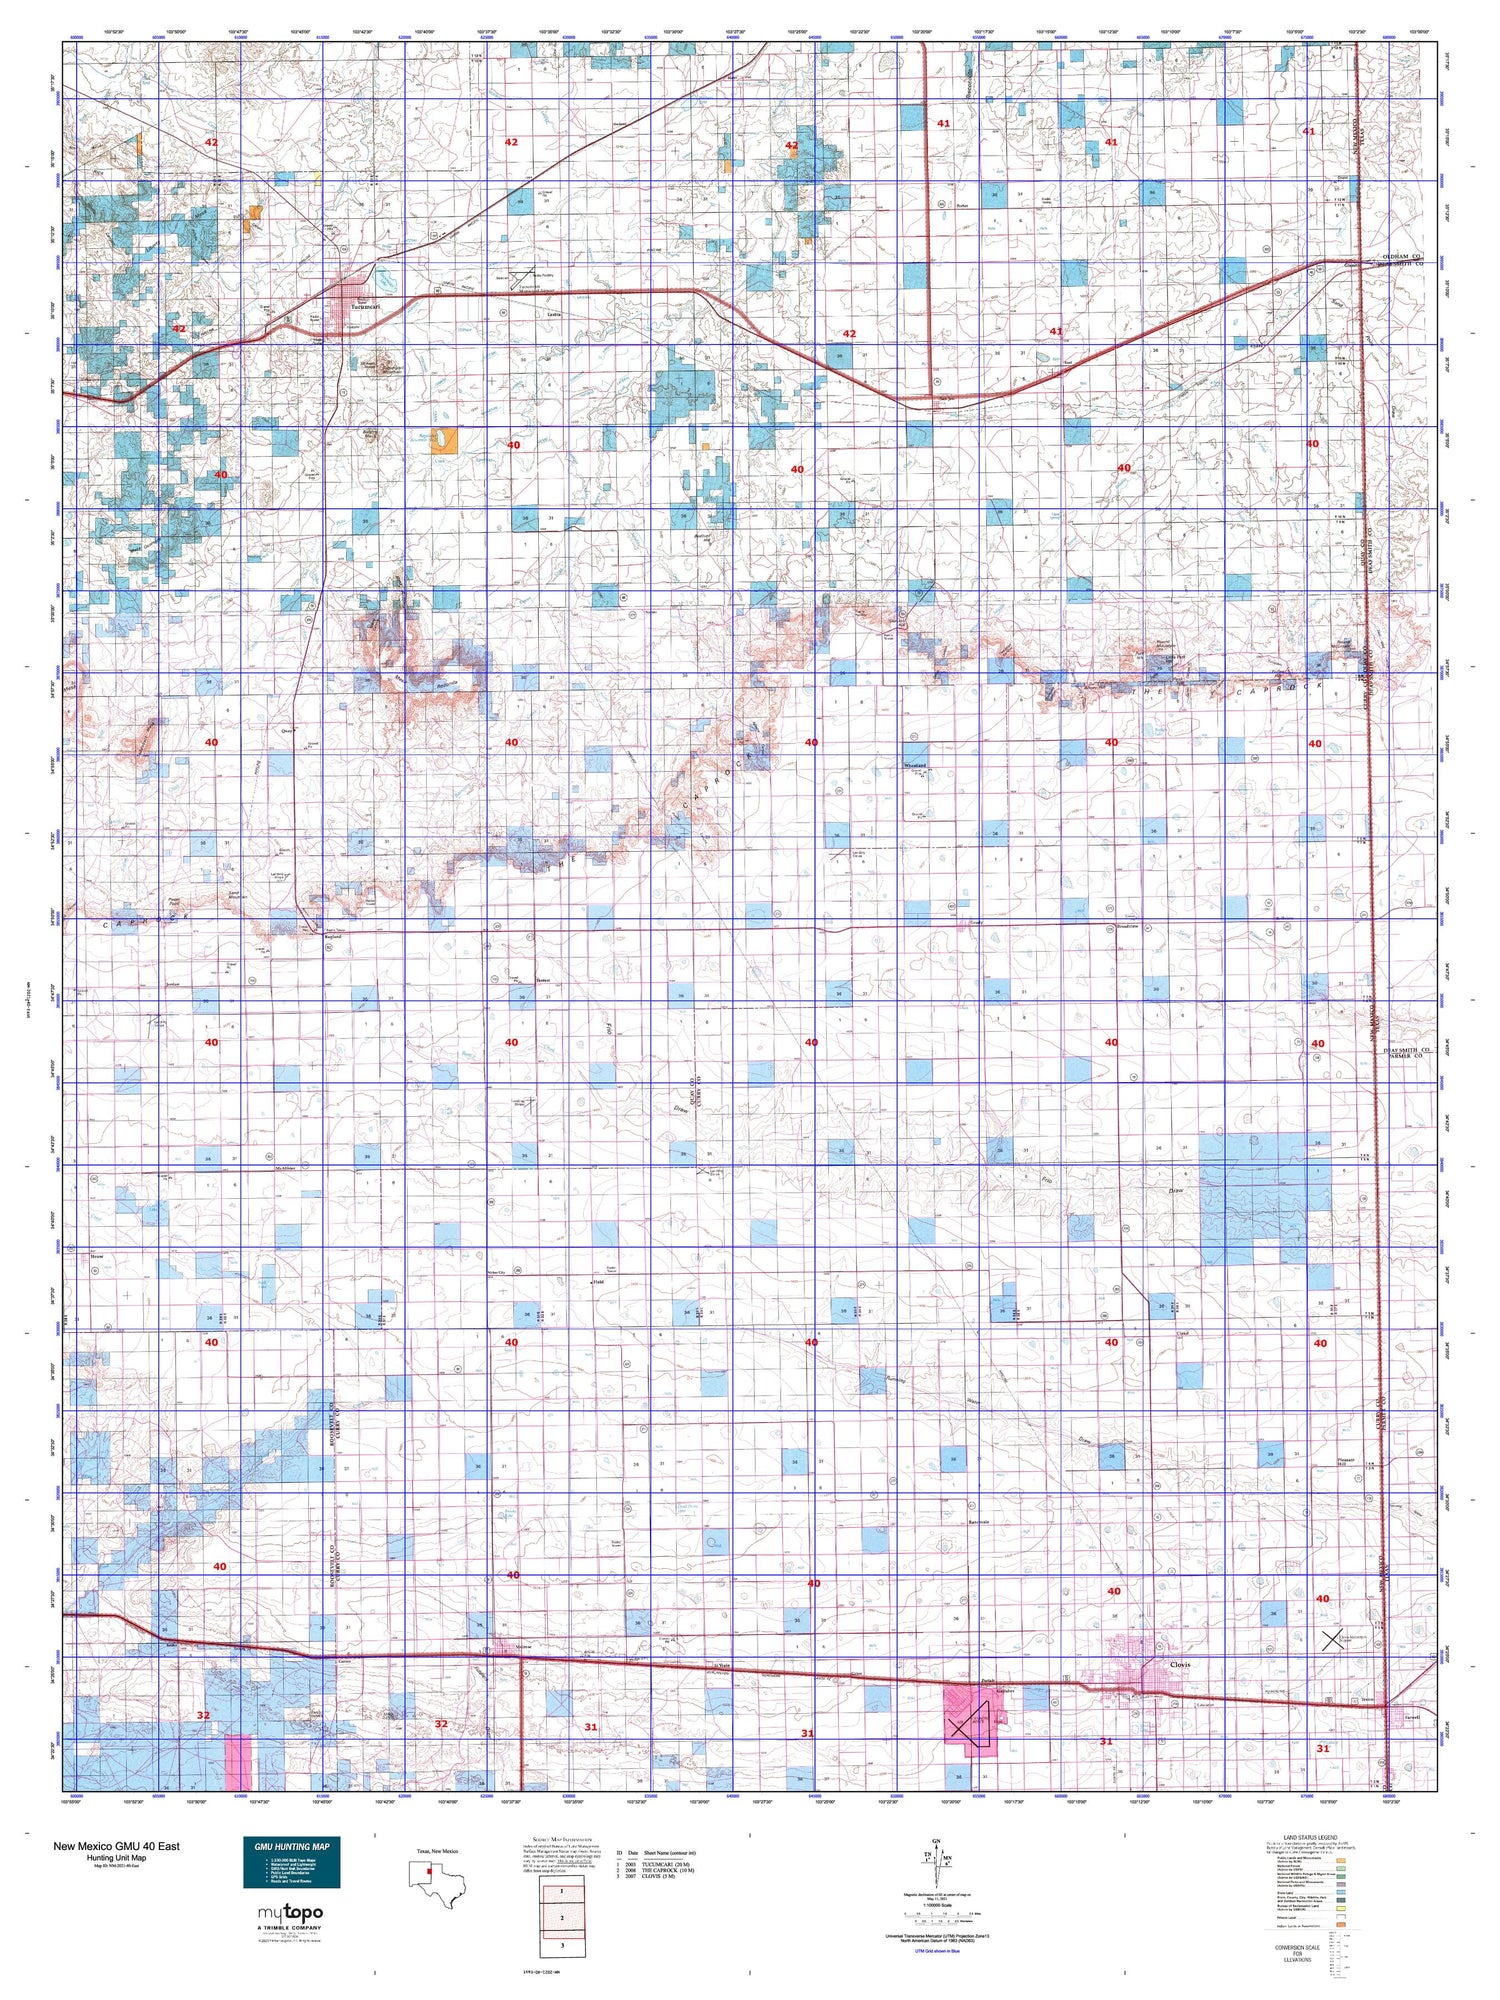 New Mexico GMU 40 East Map Image